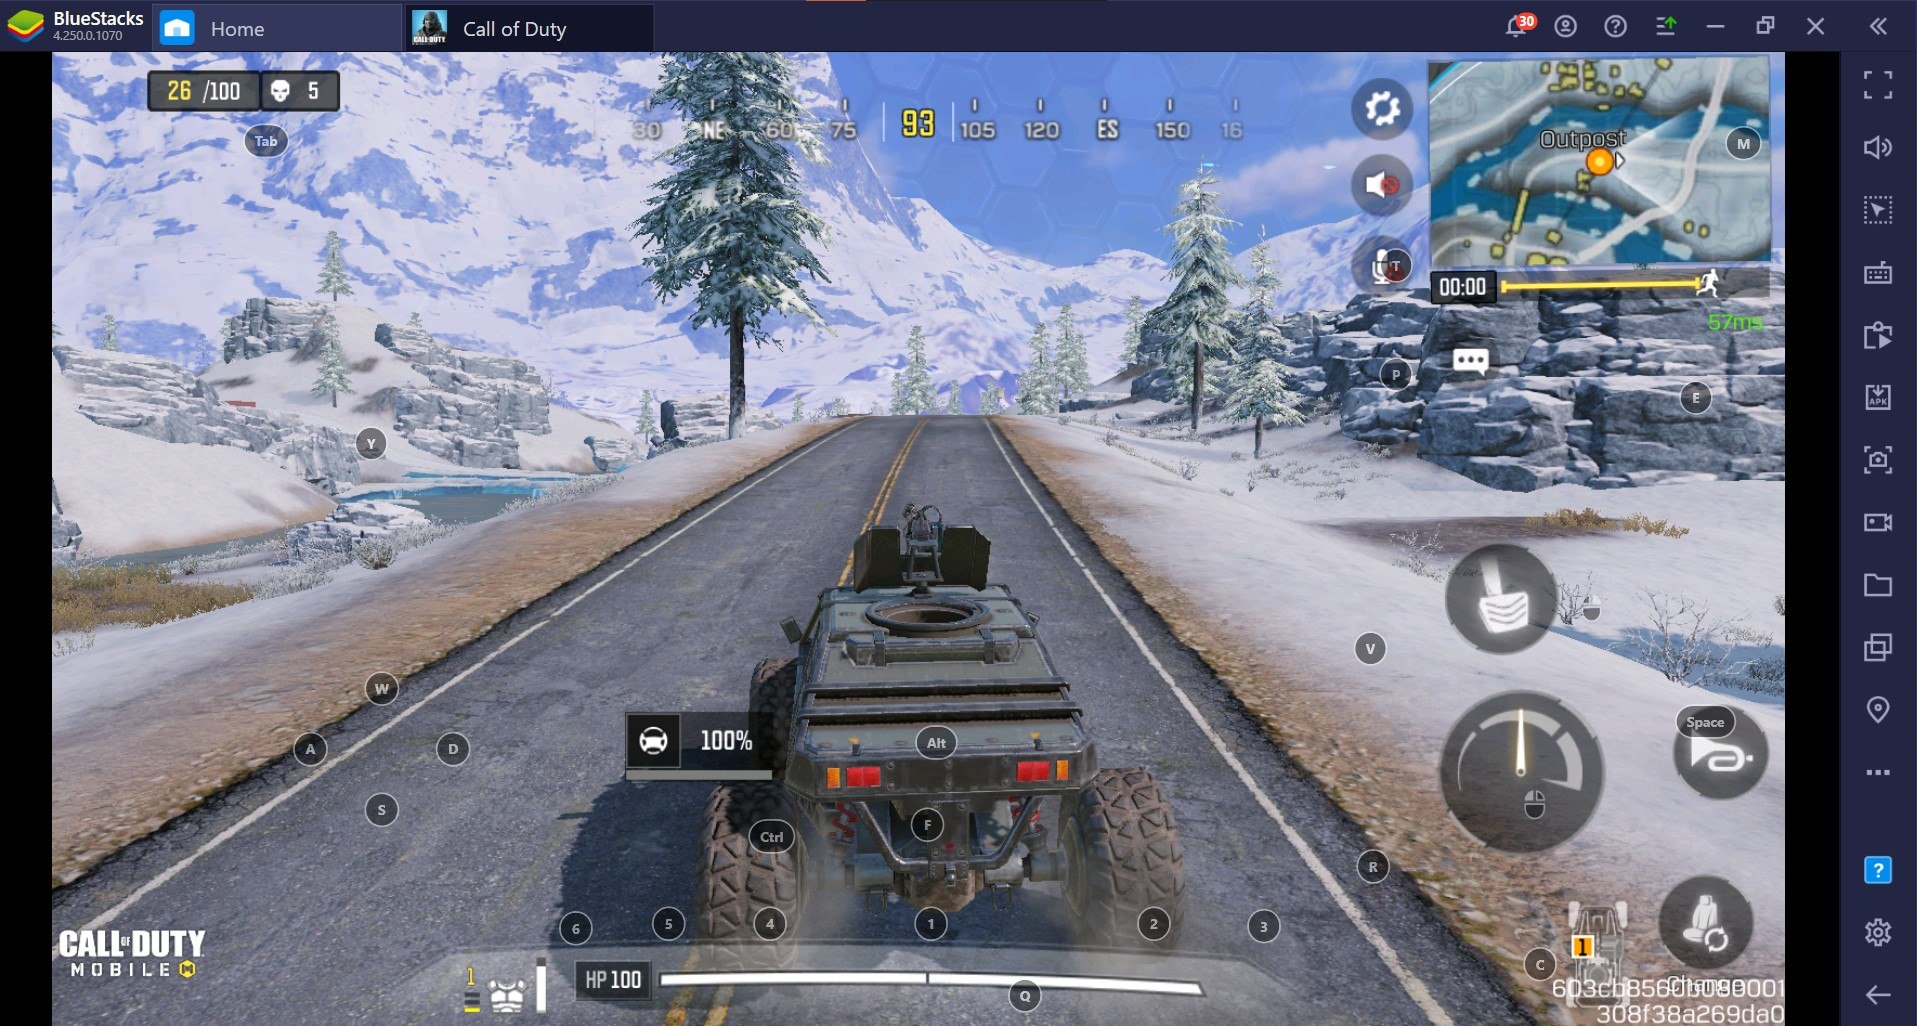 BlueStacks Guide to Vehicles in Call of Duty: Mobile